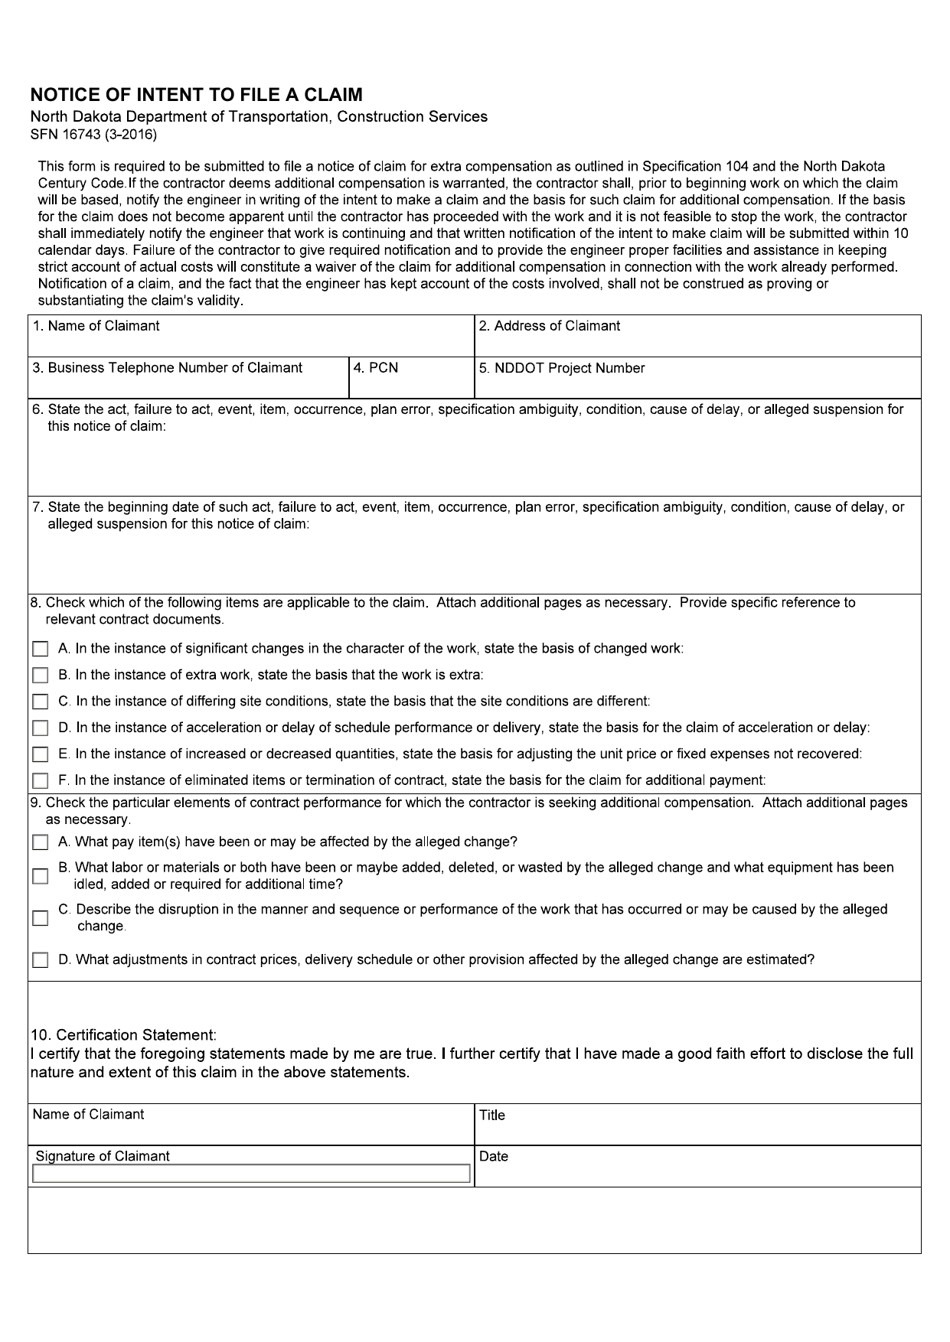 Form SFN16743 Notice of Intent to File a Claim - North Dakota, Page 1